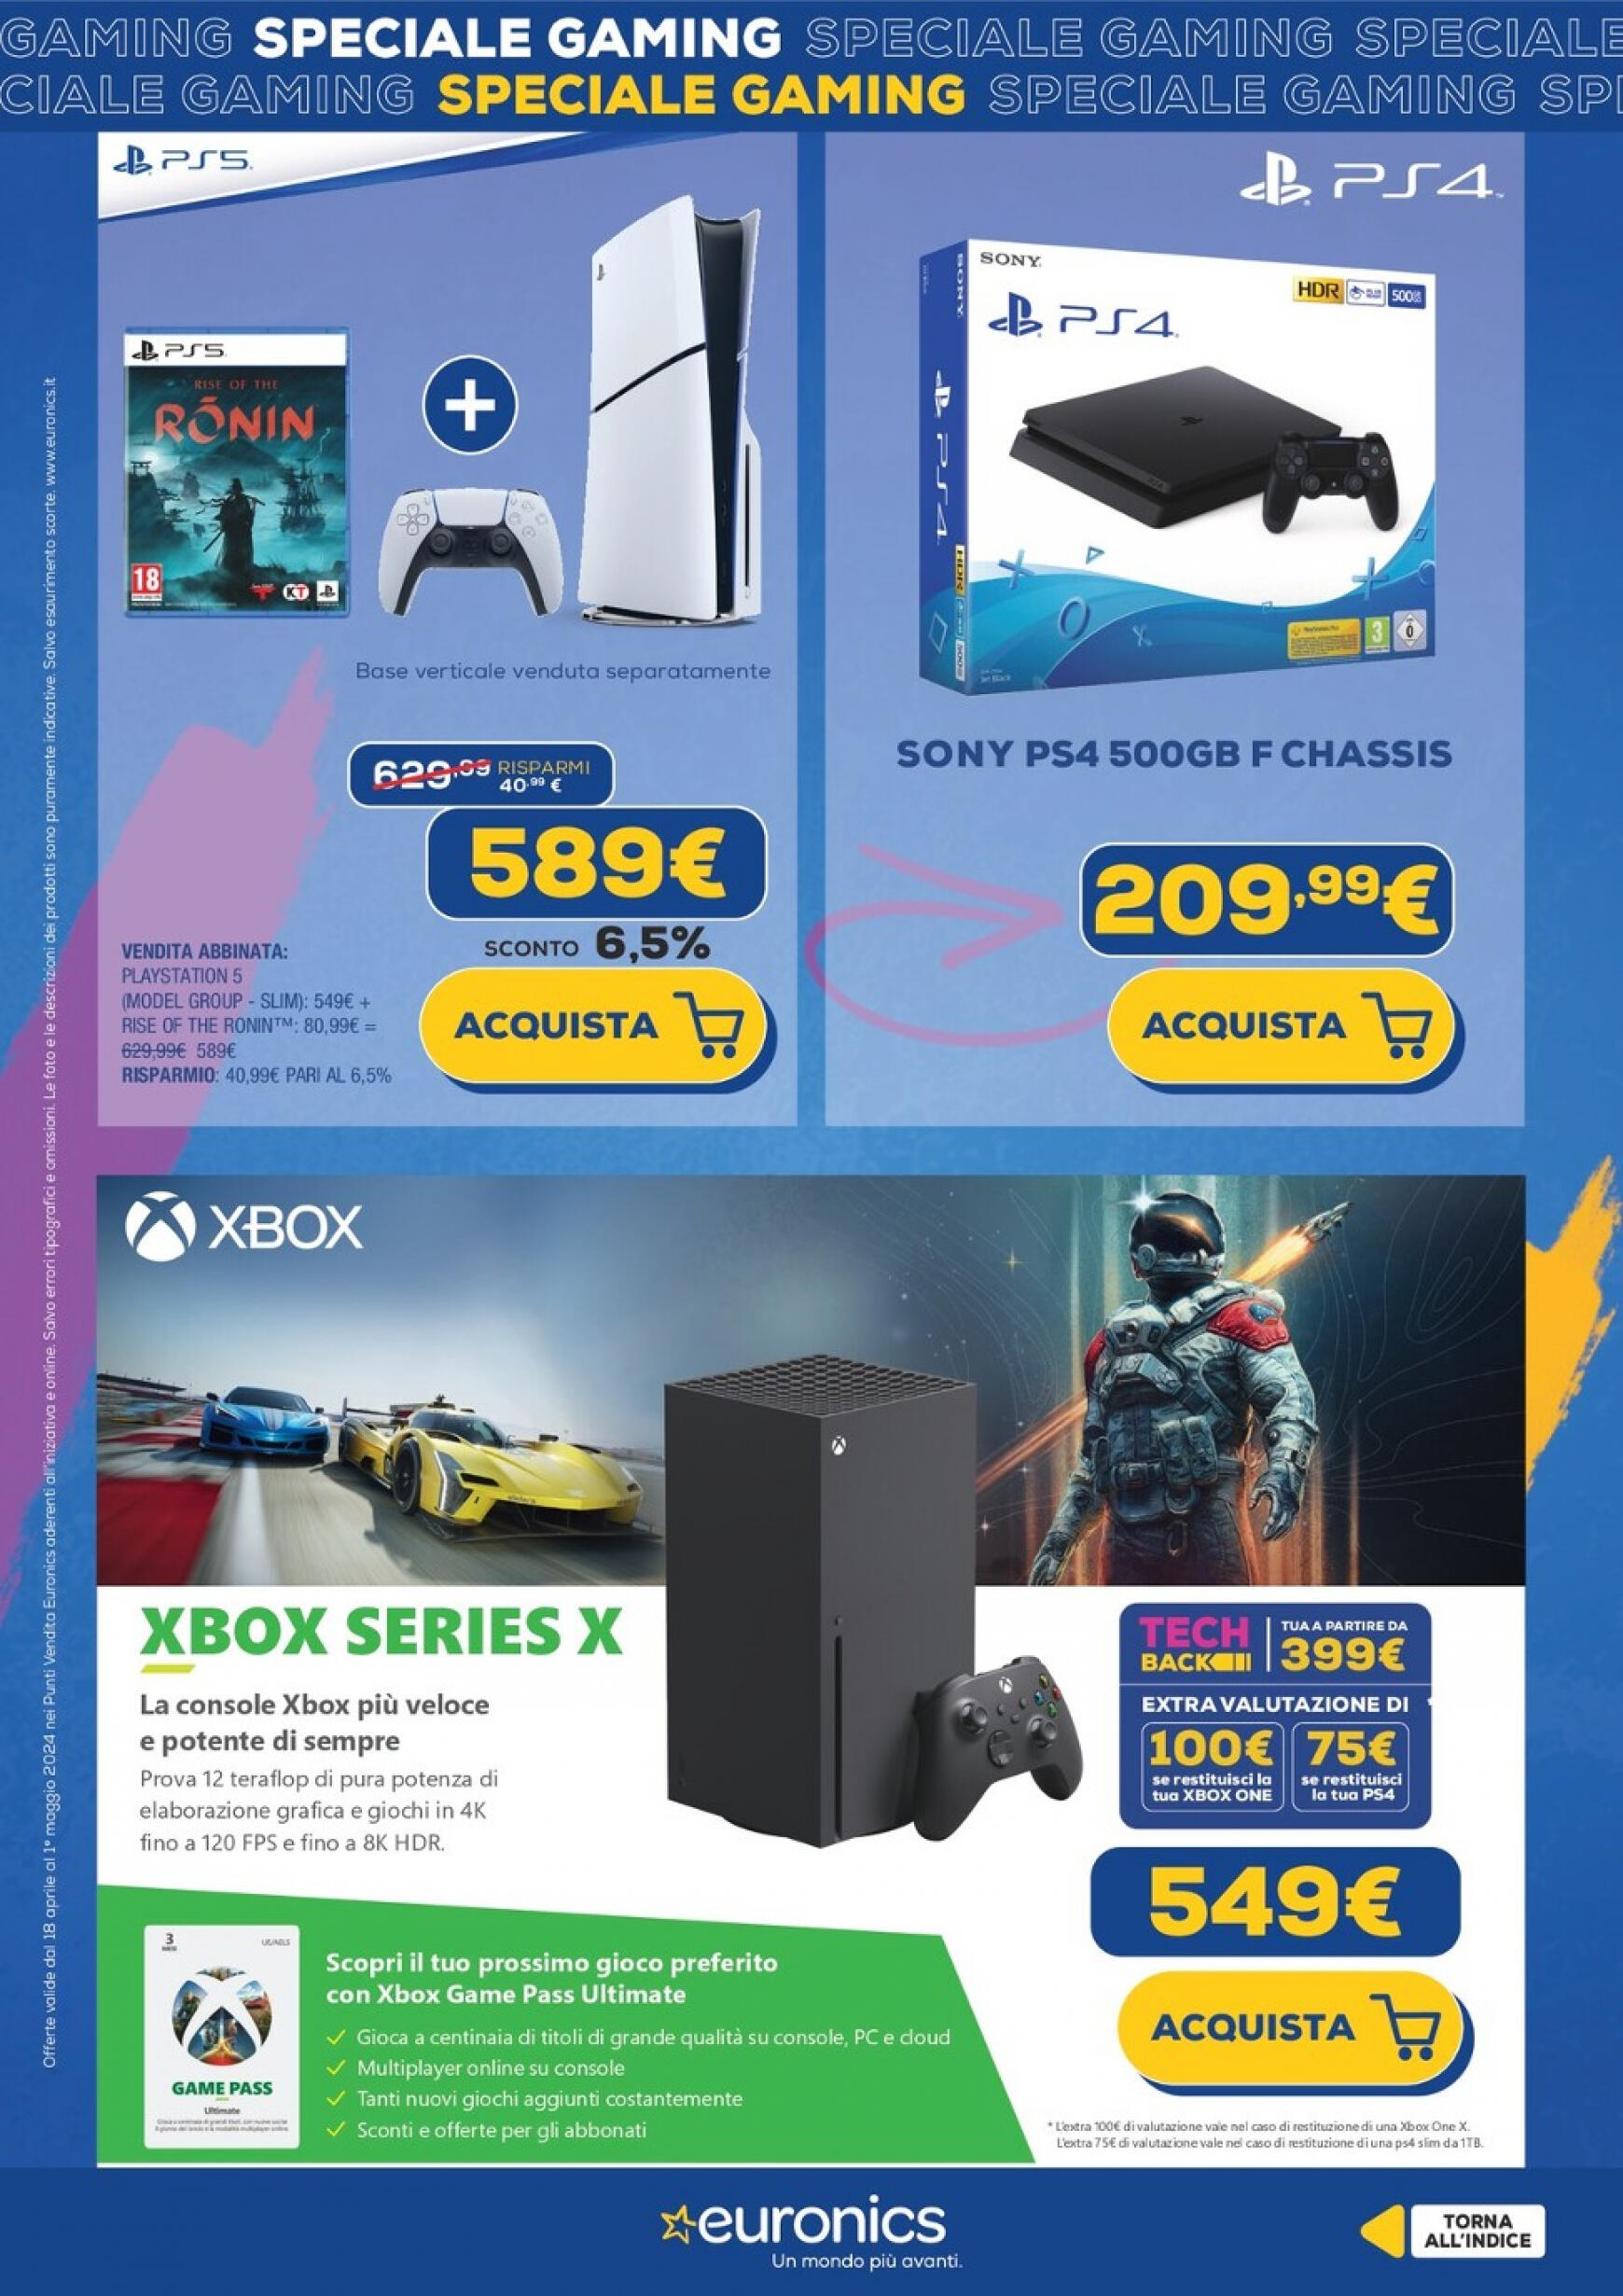 euronics - Nuovo volantino Euronics - Speciale Gaming 18.04. - 01.05. - page: 29